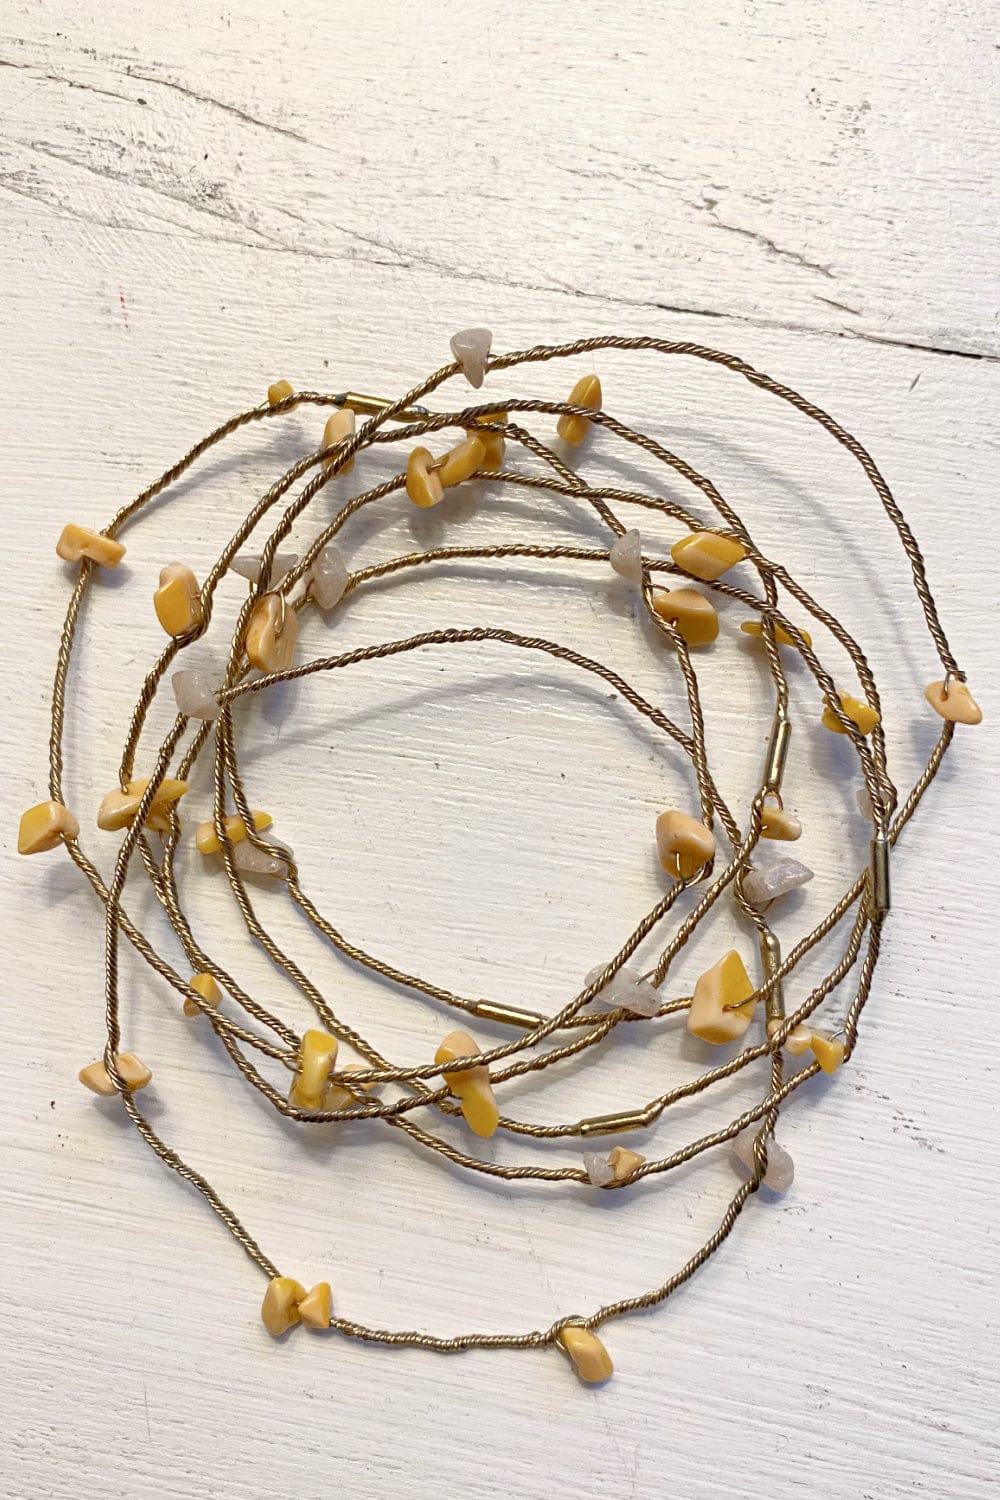 Light gold colored brass twisted wire bracelets embellished with tiny carmel colored stones.